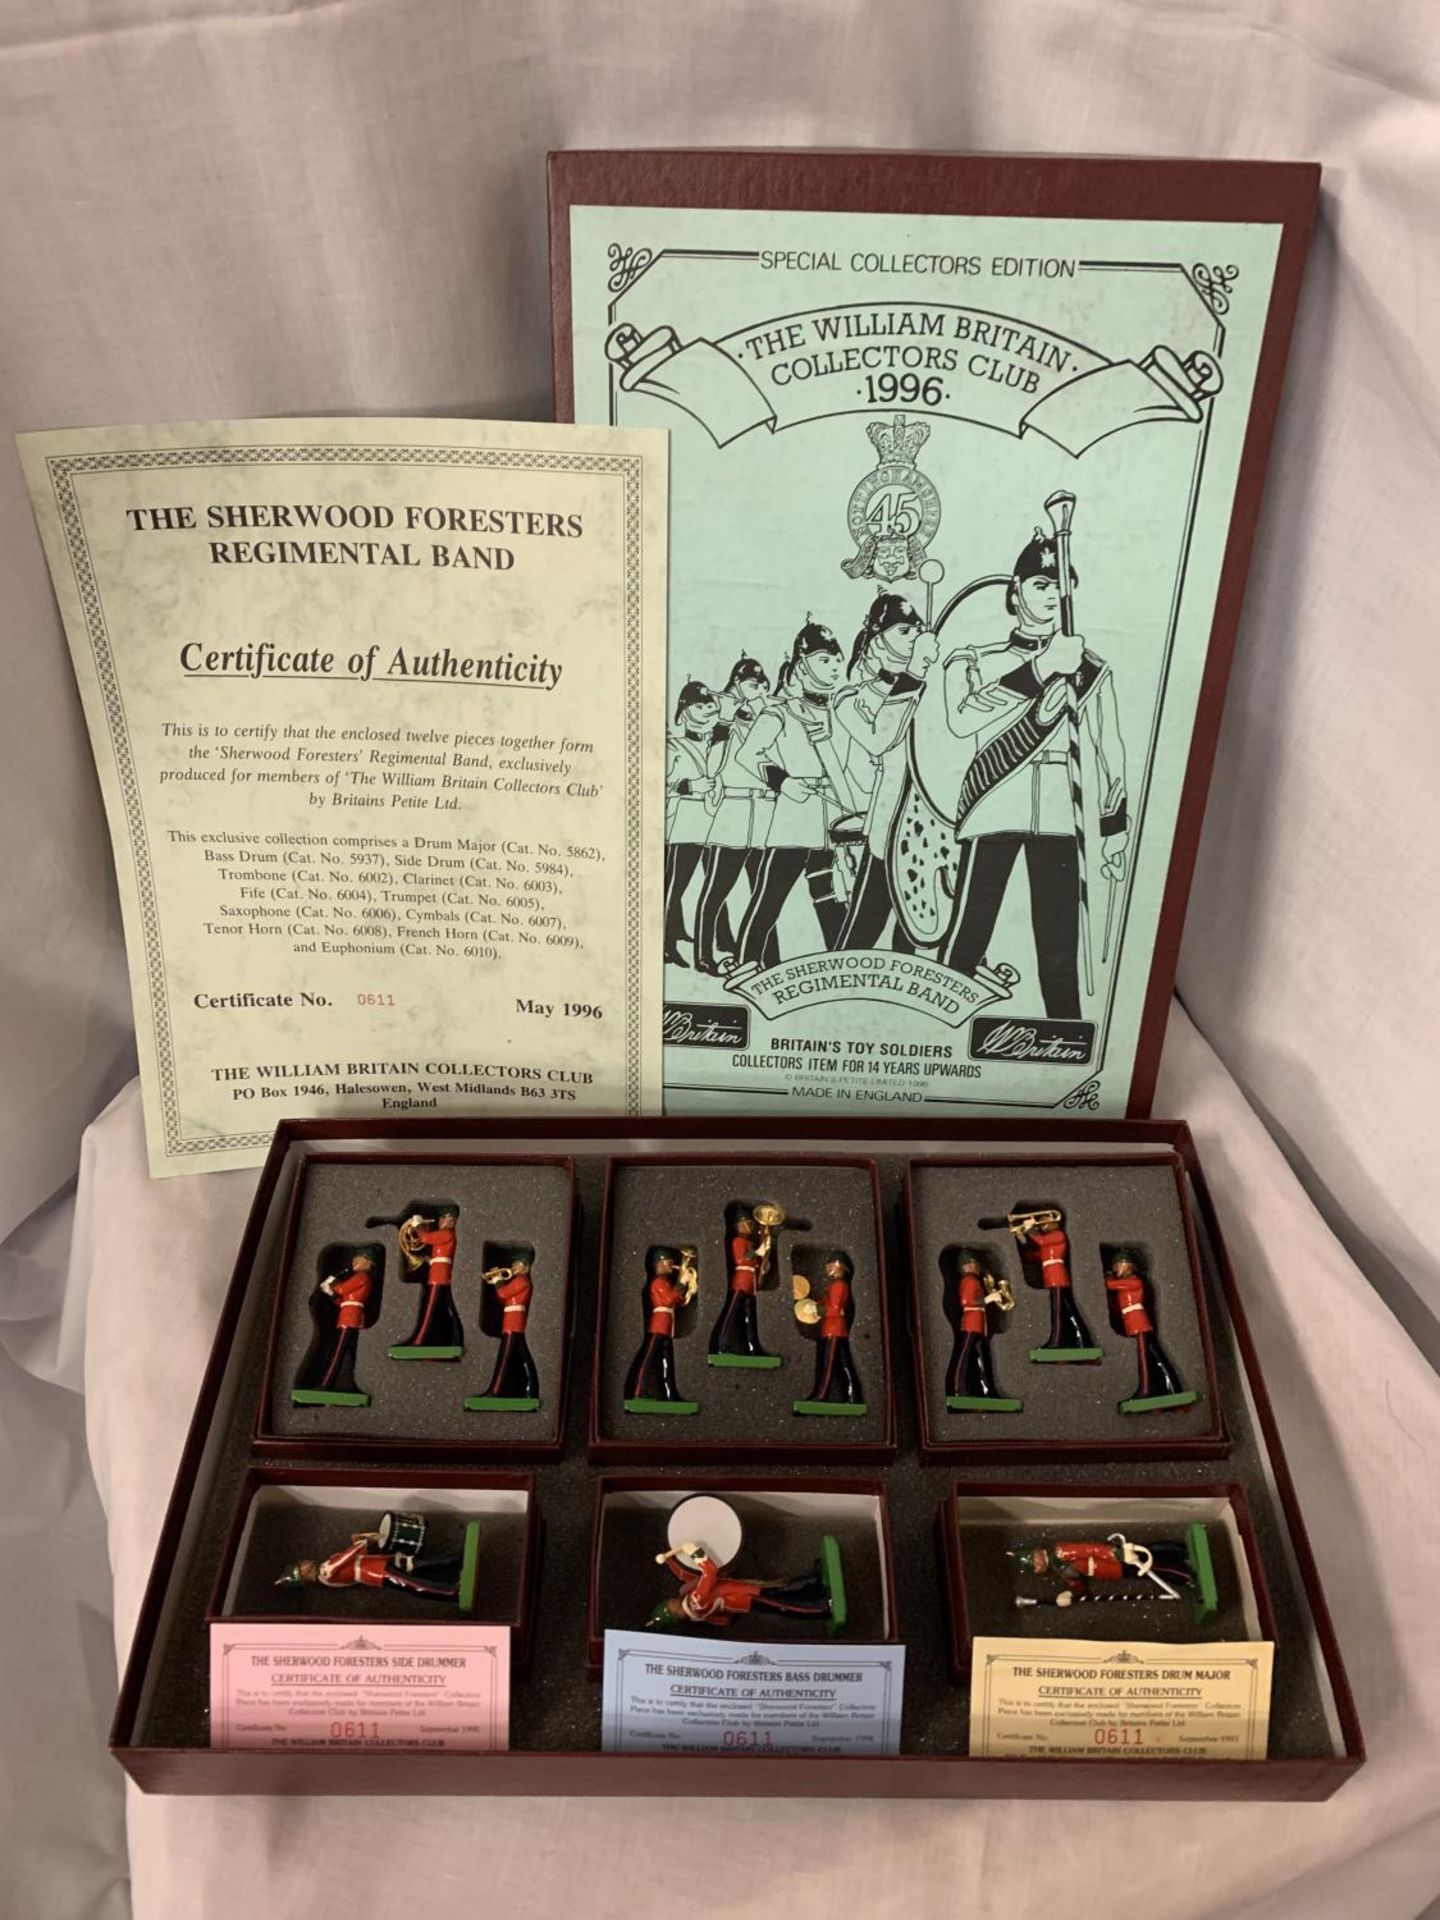 A BOXED BRITIANS THE SHERWOOD FORESTERS REGIMENTAL BAND TWELVE PIECE MODEL SOLDIER SET - LIMITED